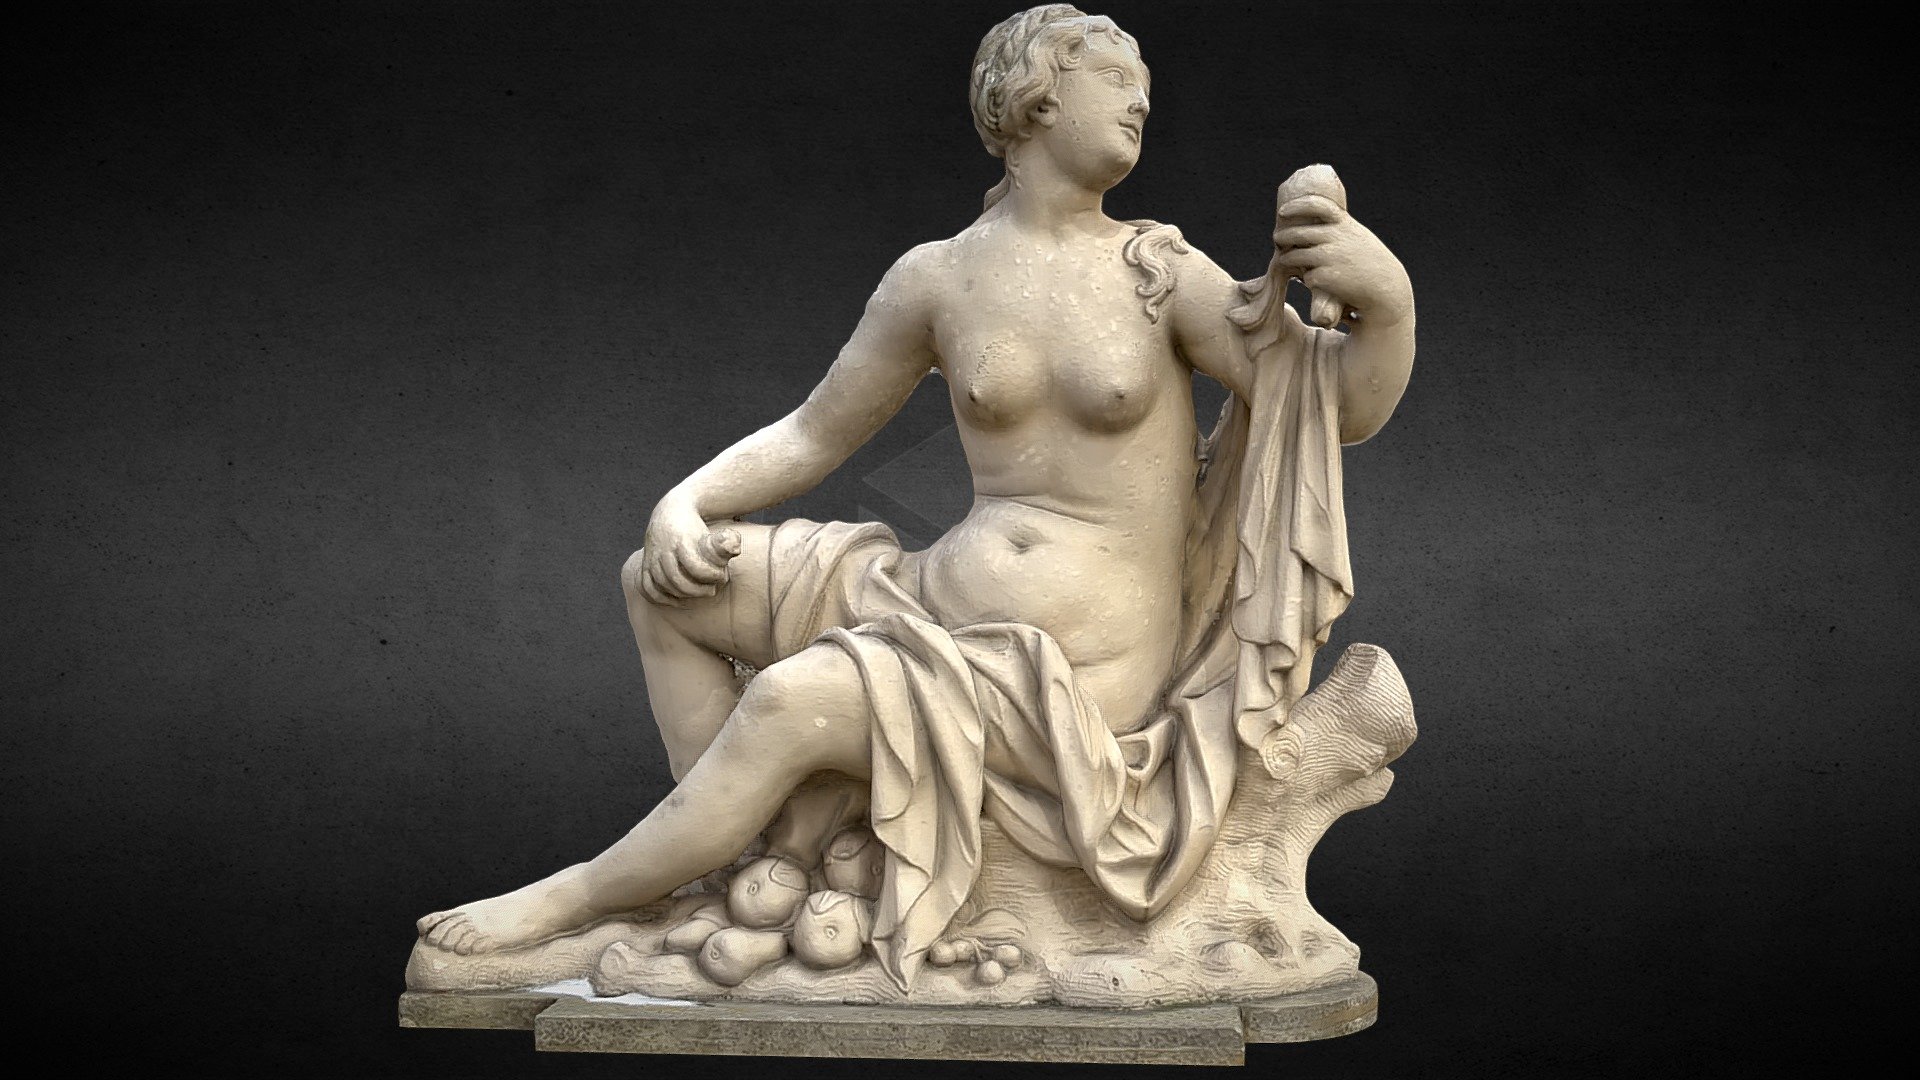 canon R7 24mm lens camera scan
low poly optimized mesh smoothing groups
8k textures: BaseColor
4k textures: Roughness, Nrm, Occlusion - ancient nymph sculpture photogrammetry - Buy Royalty Free 3D model by scanforge (@looppy) 3d model